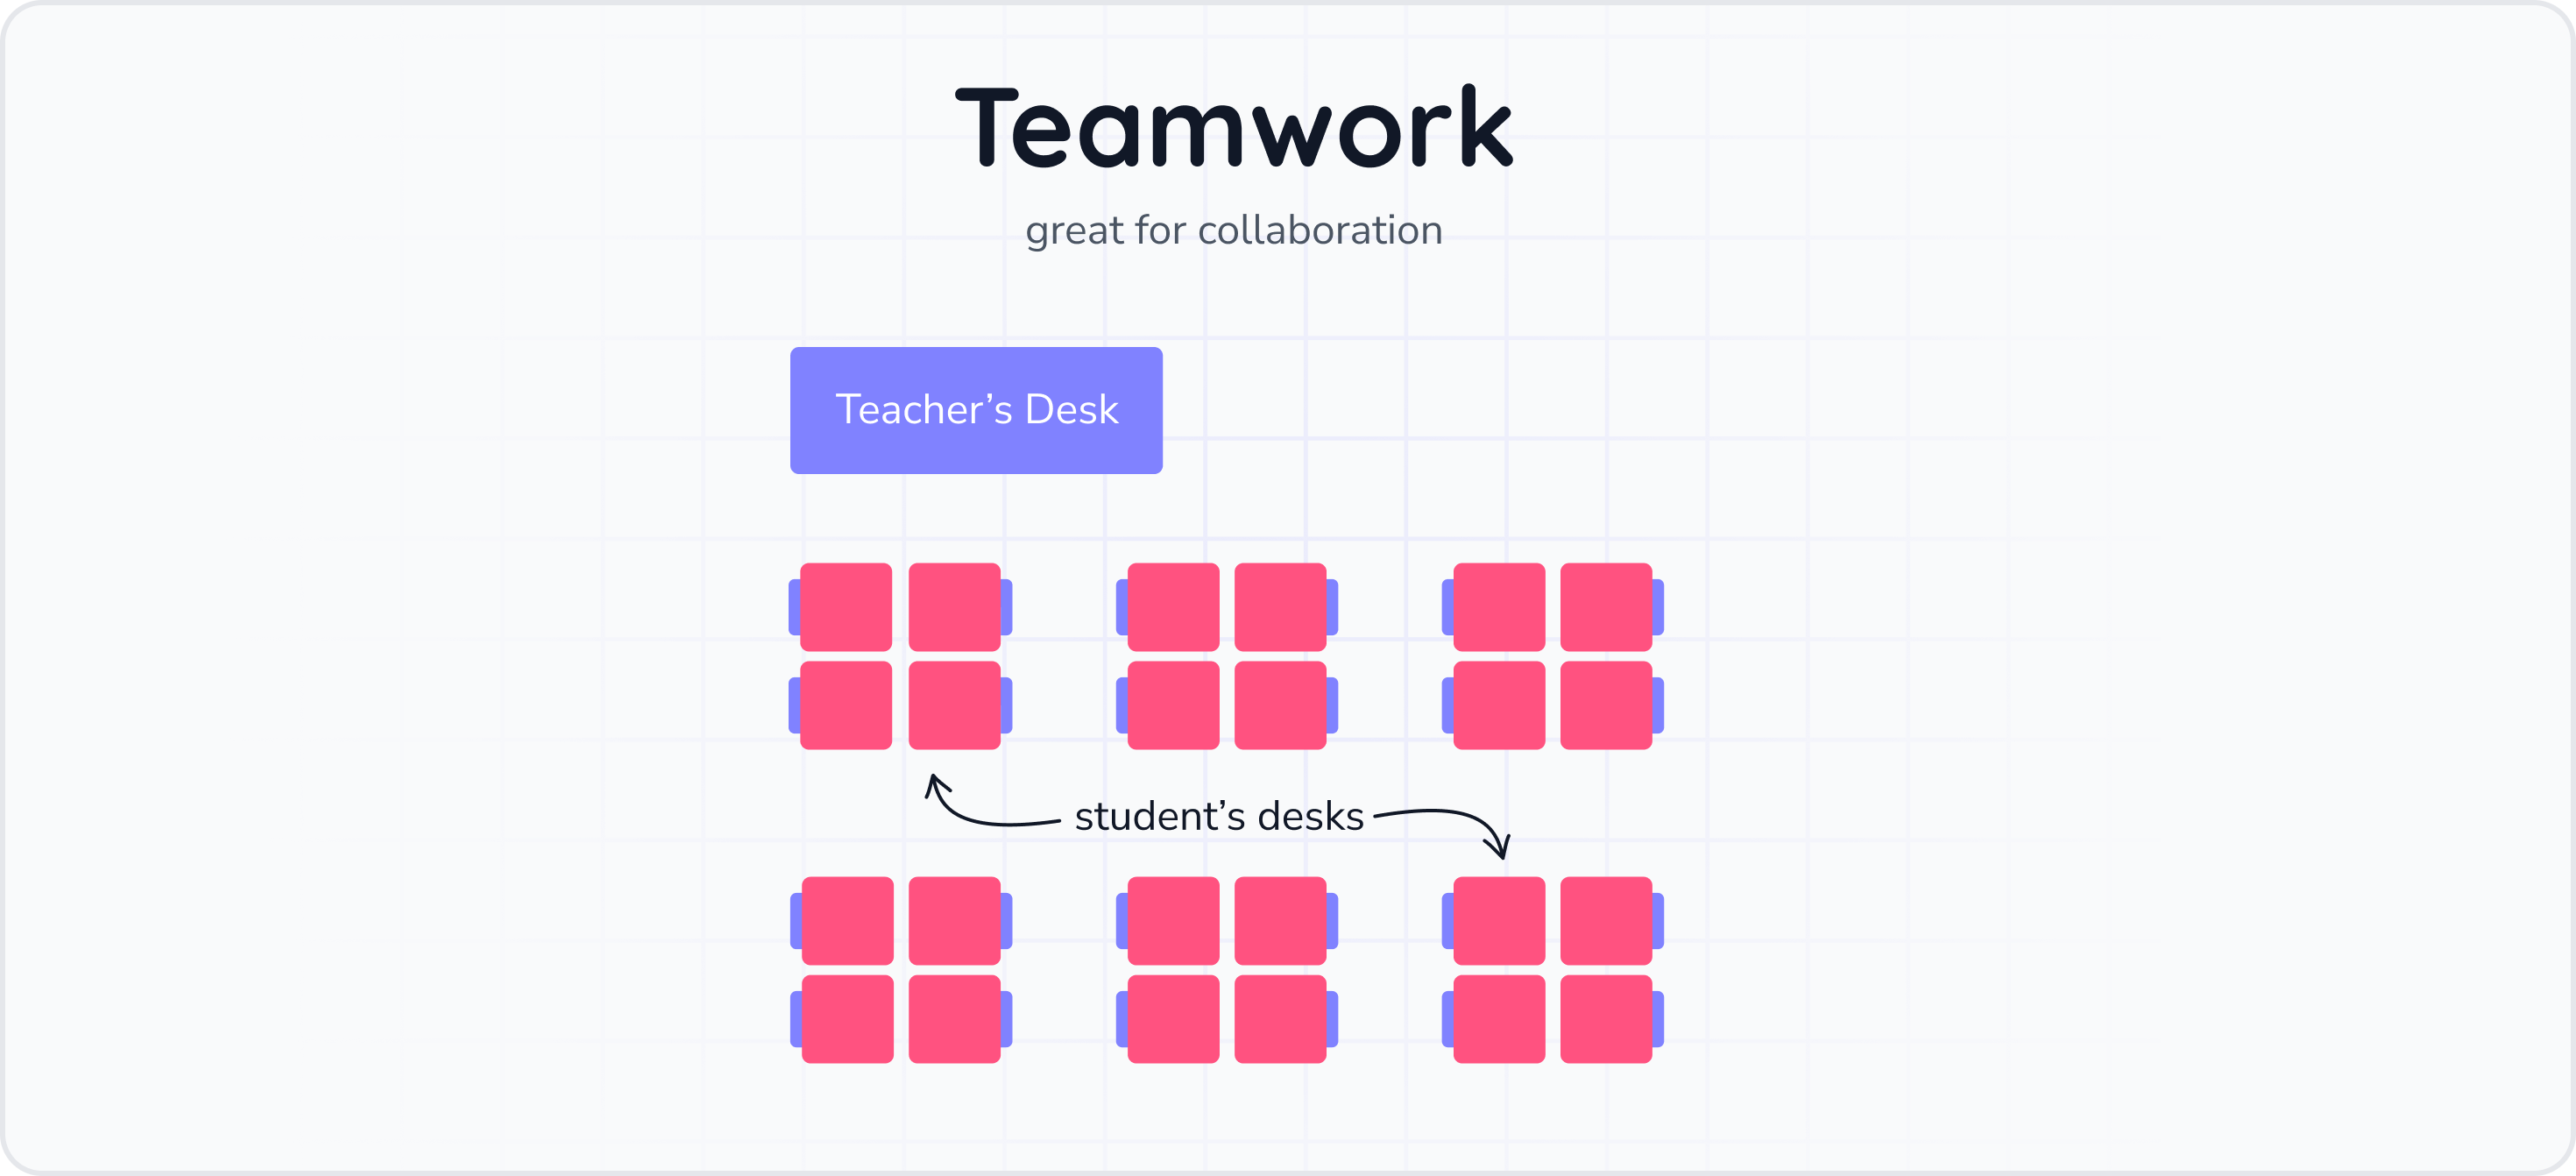 This image shows the layout of a teamwork-based group seating plan, including where the student's desks and the teacher's desks are.